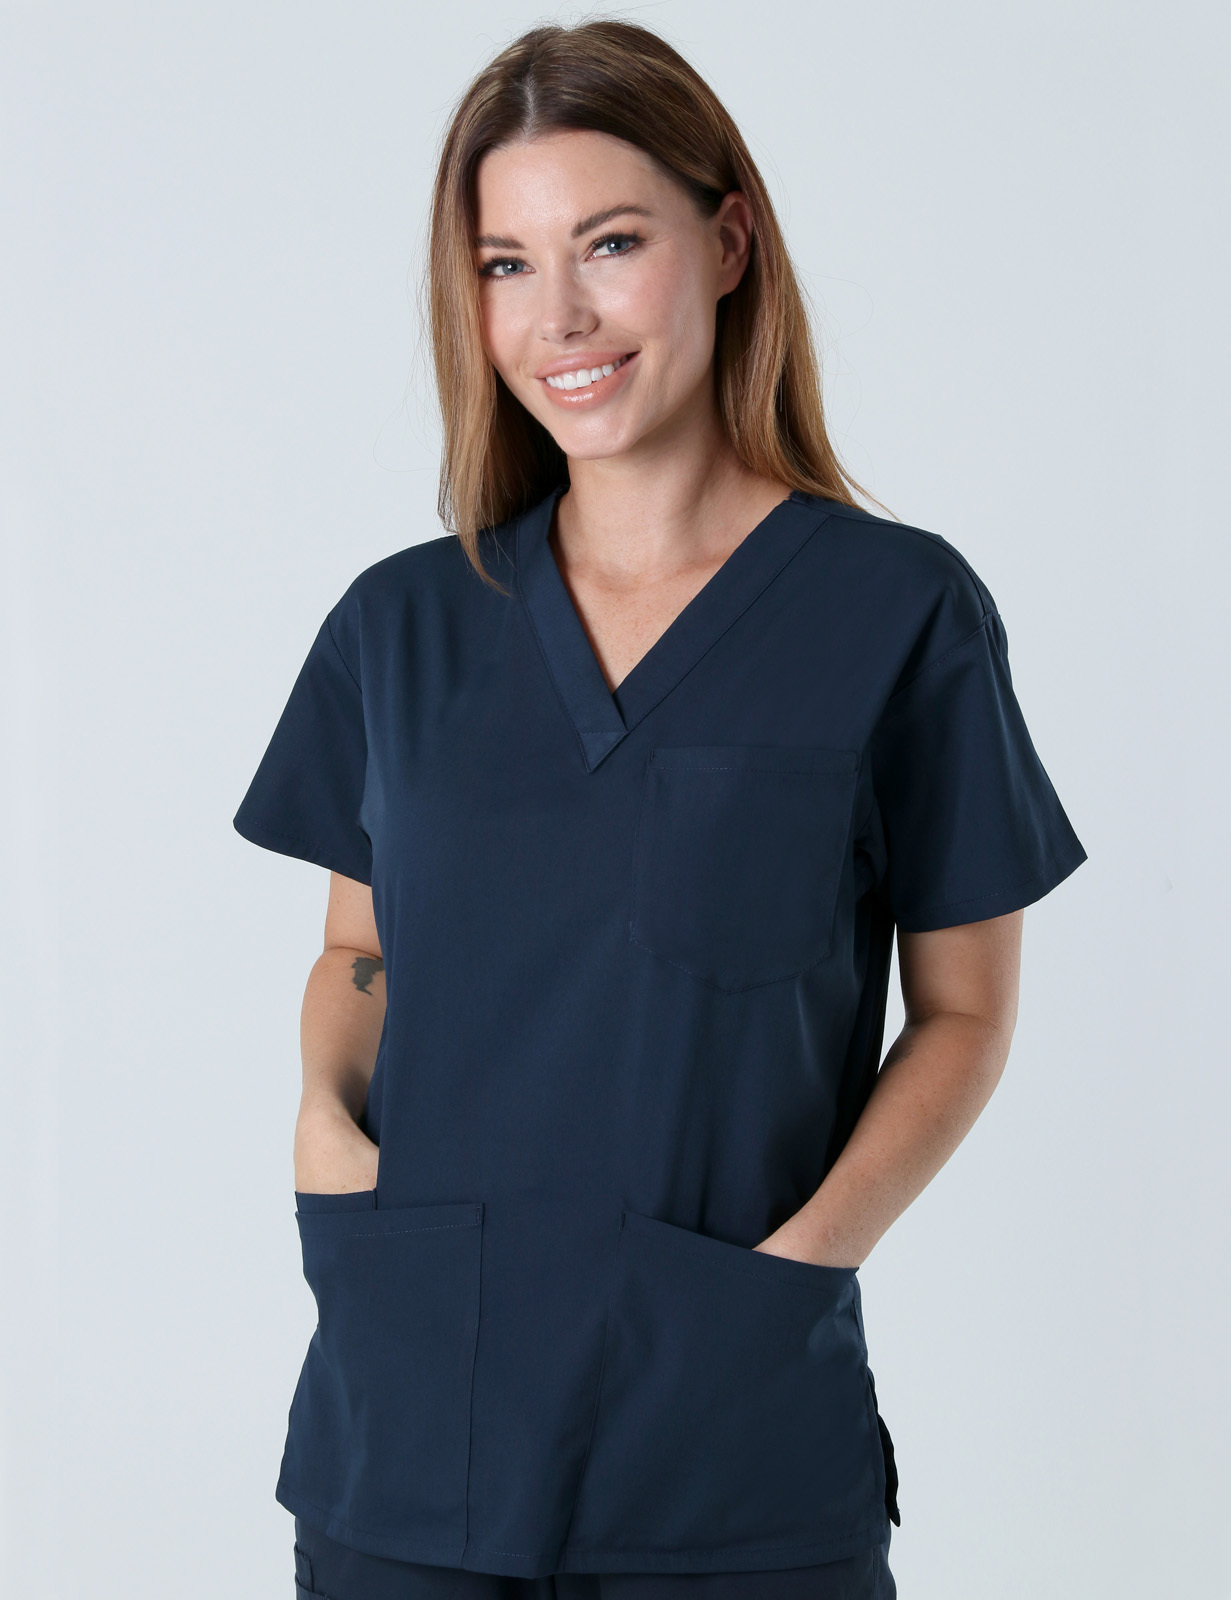 Melbourne Hospital - RN (4 Pocket Scrub Top and Cargo Pants in Navy incl Logos)